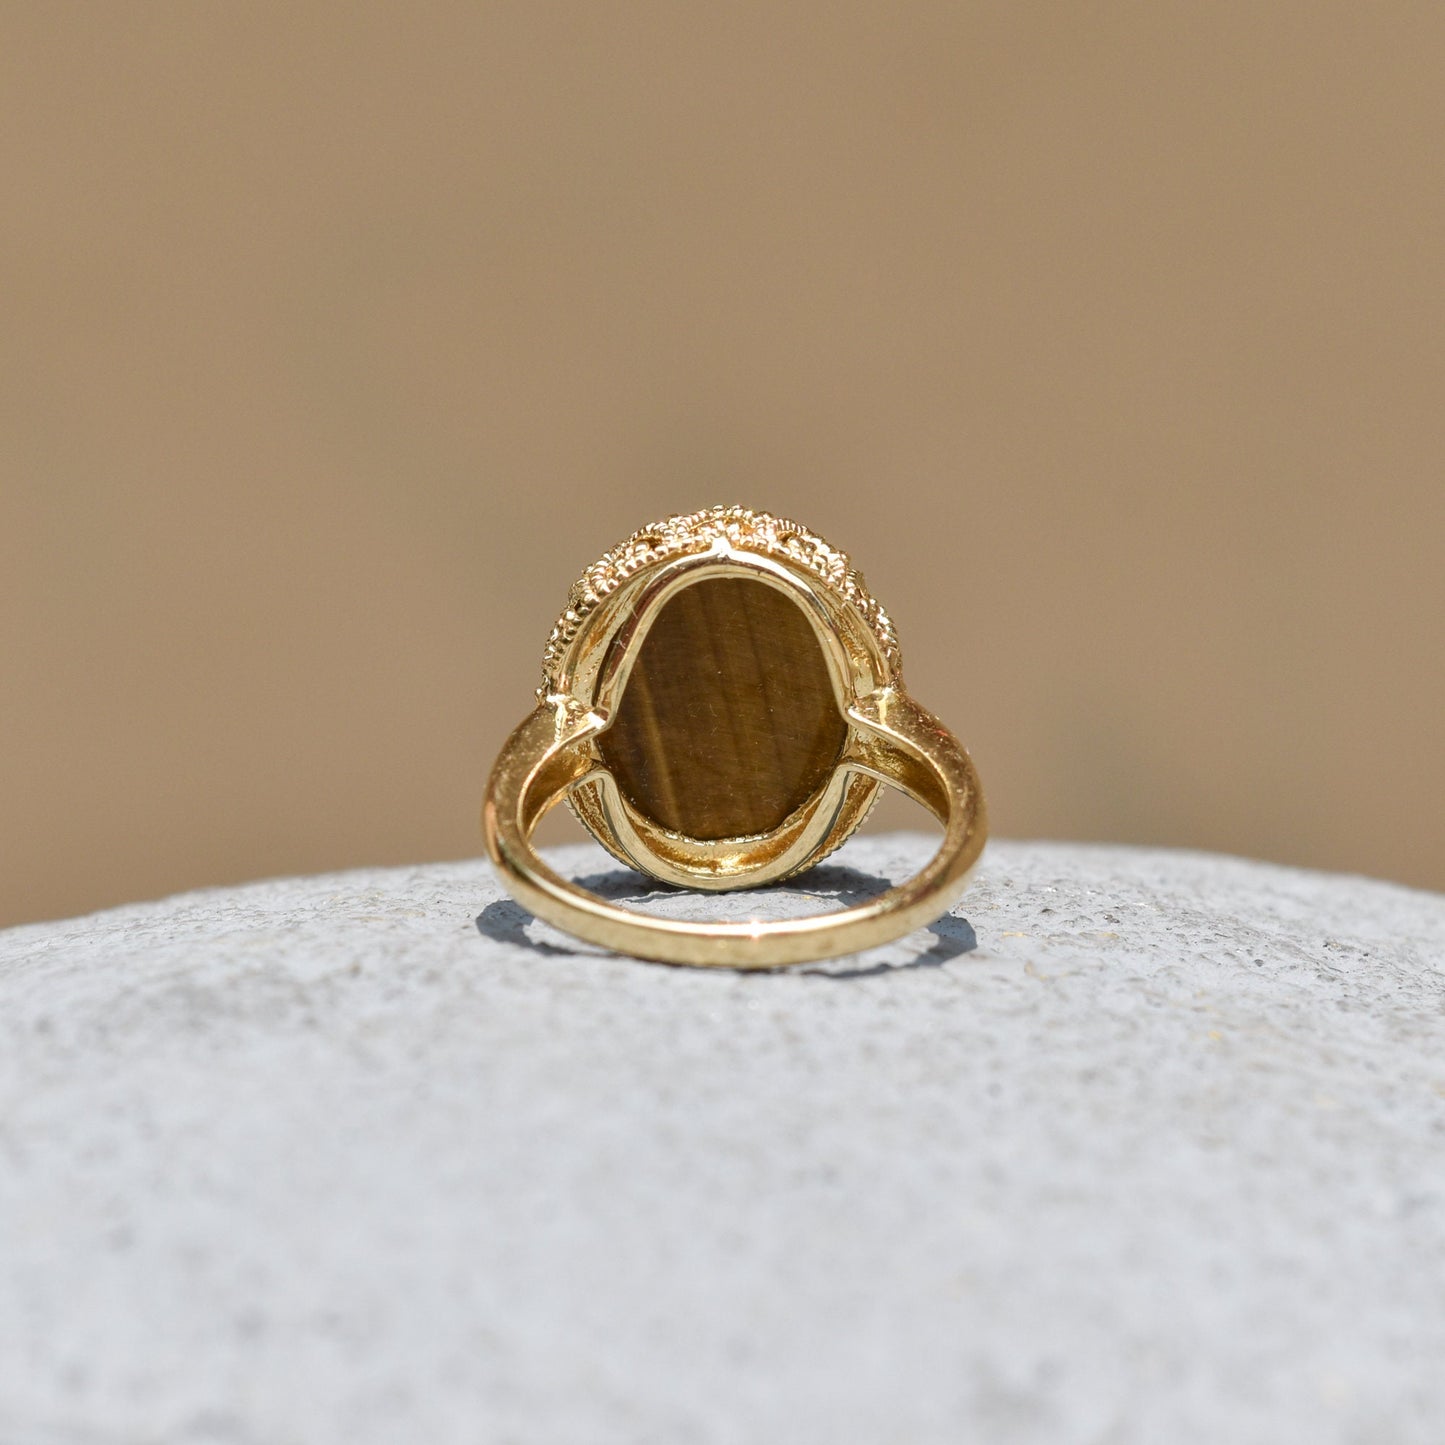 Ornate 14K Tigers Eye Cocktail Ring, Scalloped Yellow Gold Setting, Estate Jewelry, 7 1/4 US